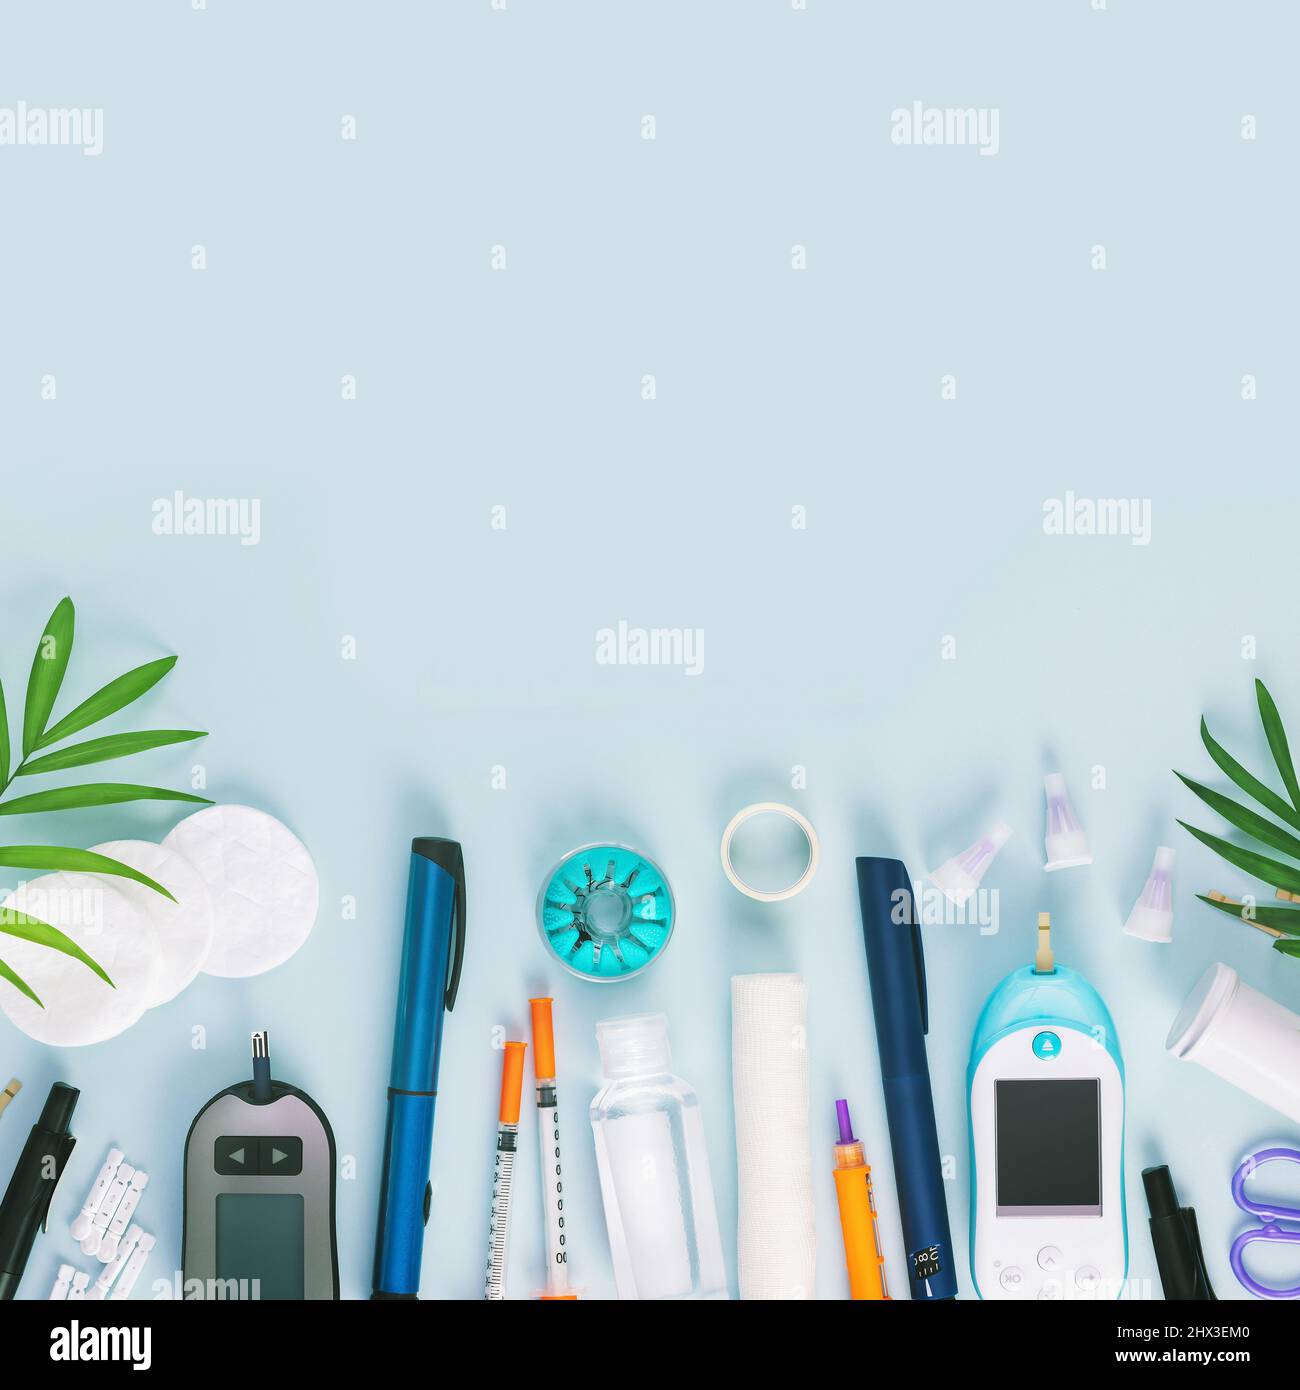 Diabetic disease banner with glucose meter, test strips for determining blood sugar levels, syringes for insulin injections, needles, sanitizing on a Stock Photo